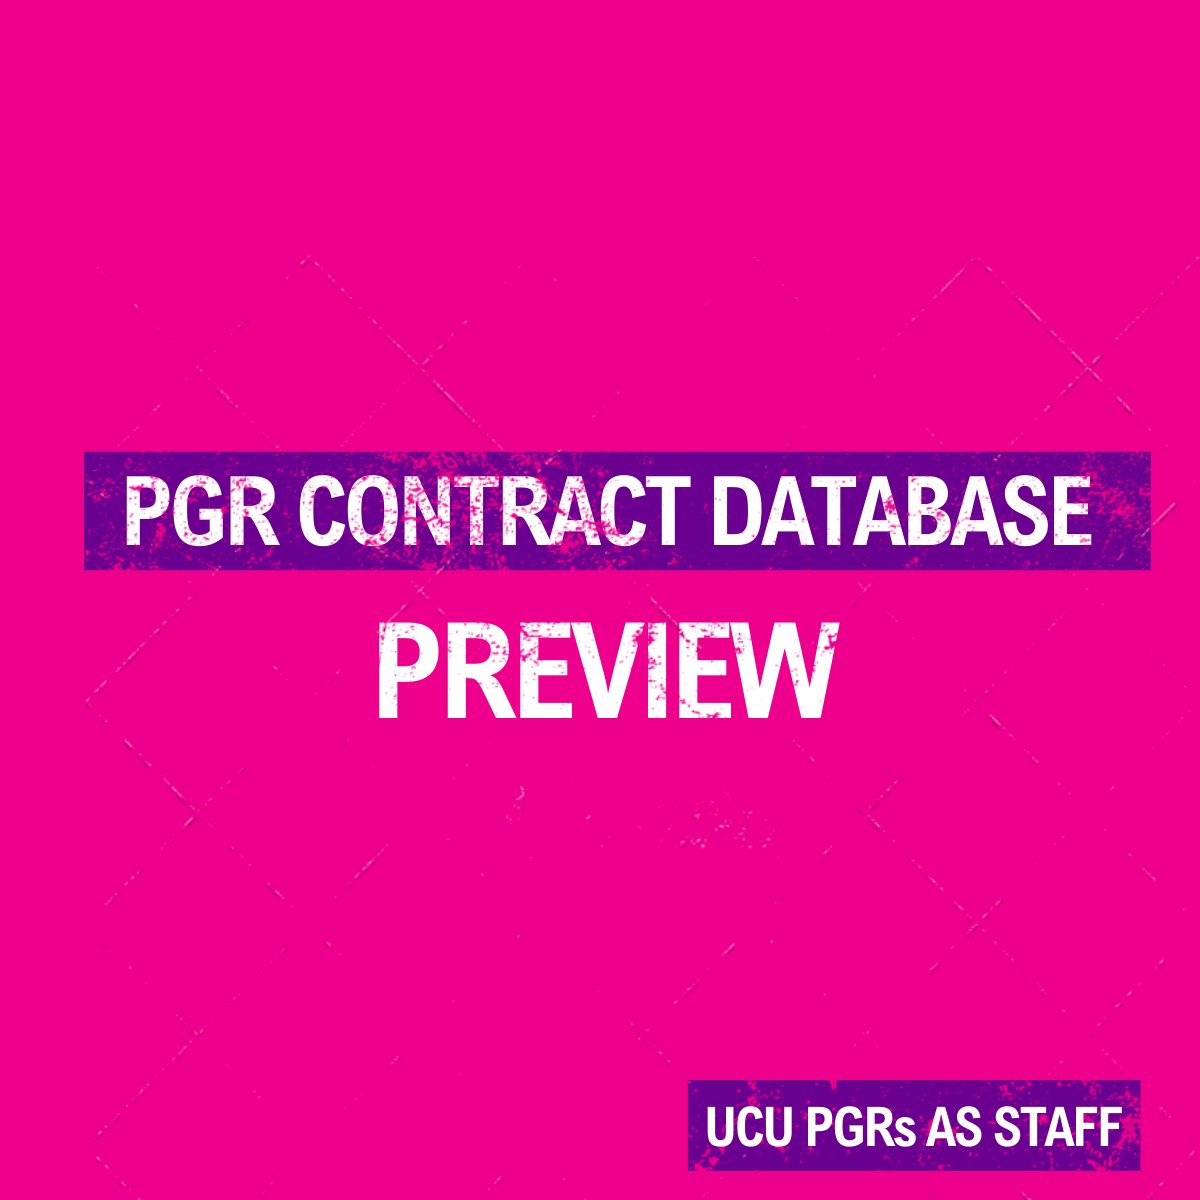 Following the successful @ucu #PGRsOrganising23 conference in January, we wanted to share an advanced preview of exciting work in progress with a collective of members from @DUCUPGR @sussexucu @CambridgeUCU @SurreyUCU @Bristol_UCUPGRs @PgrWarwick @sheffielducu @PrecariousUoL